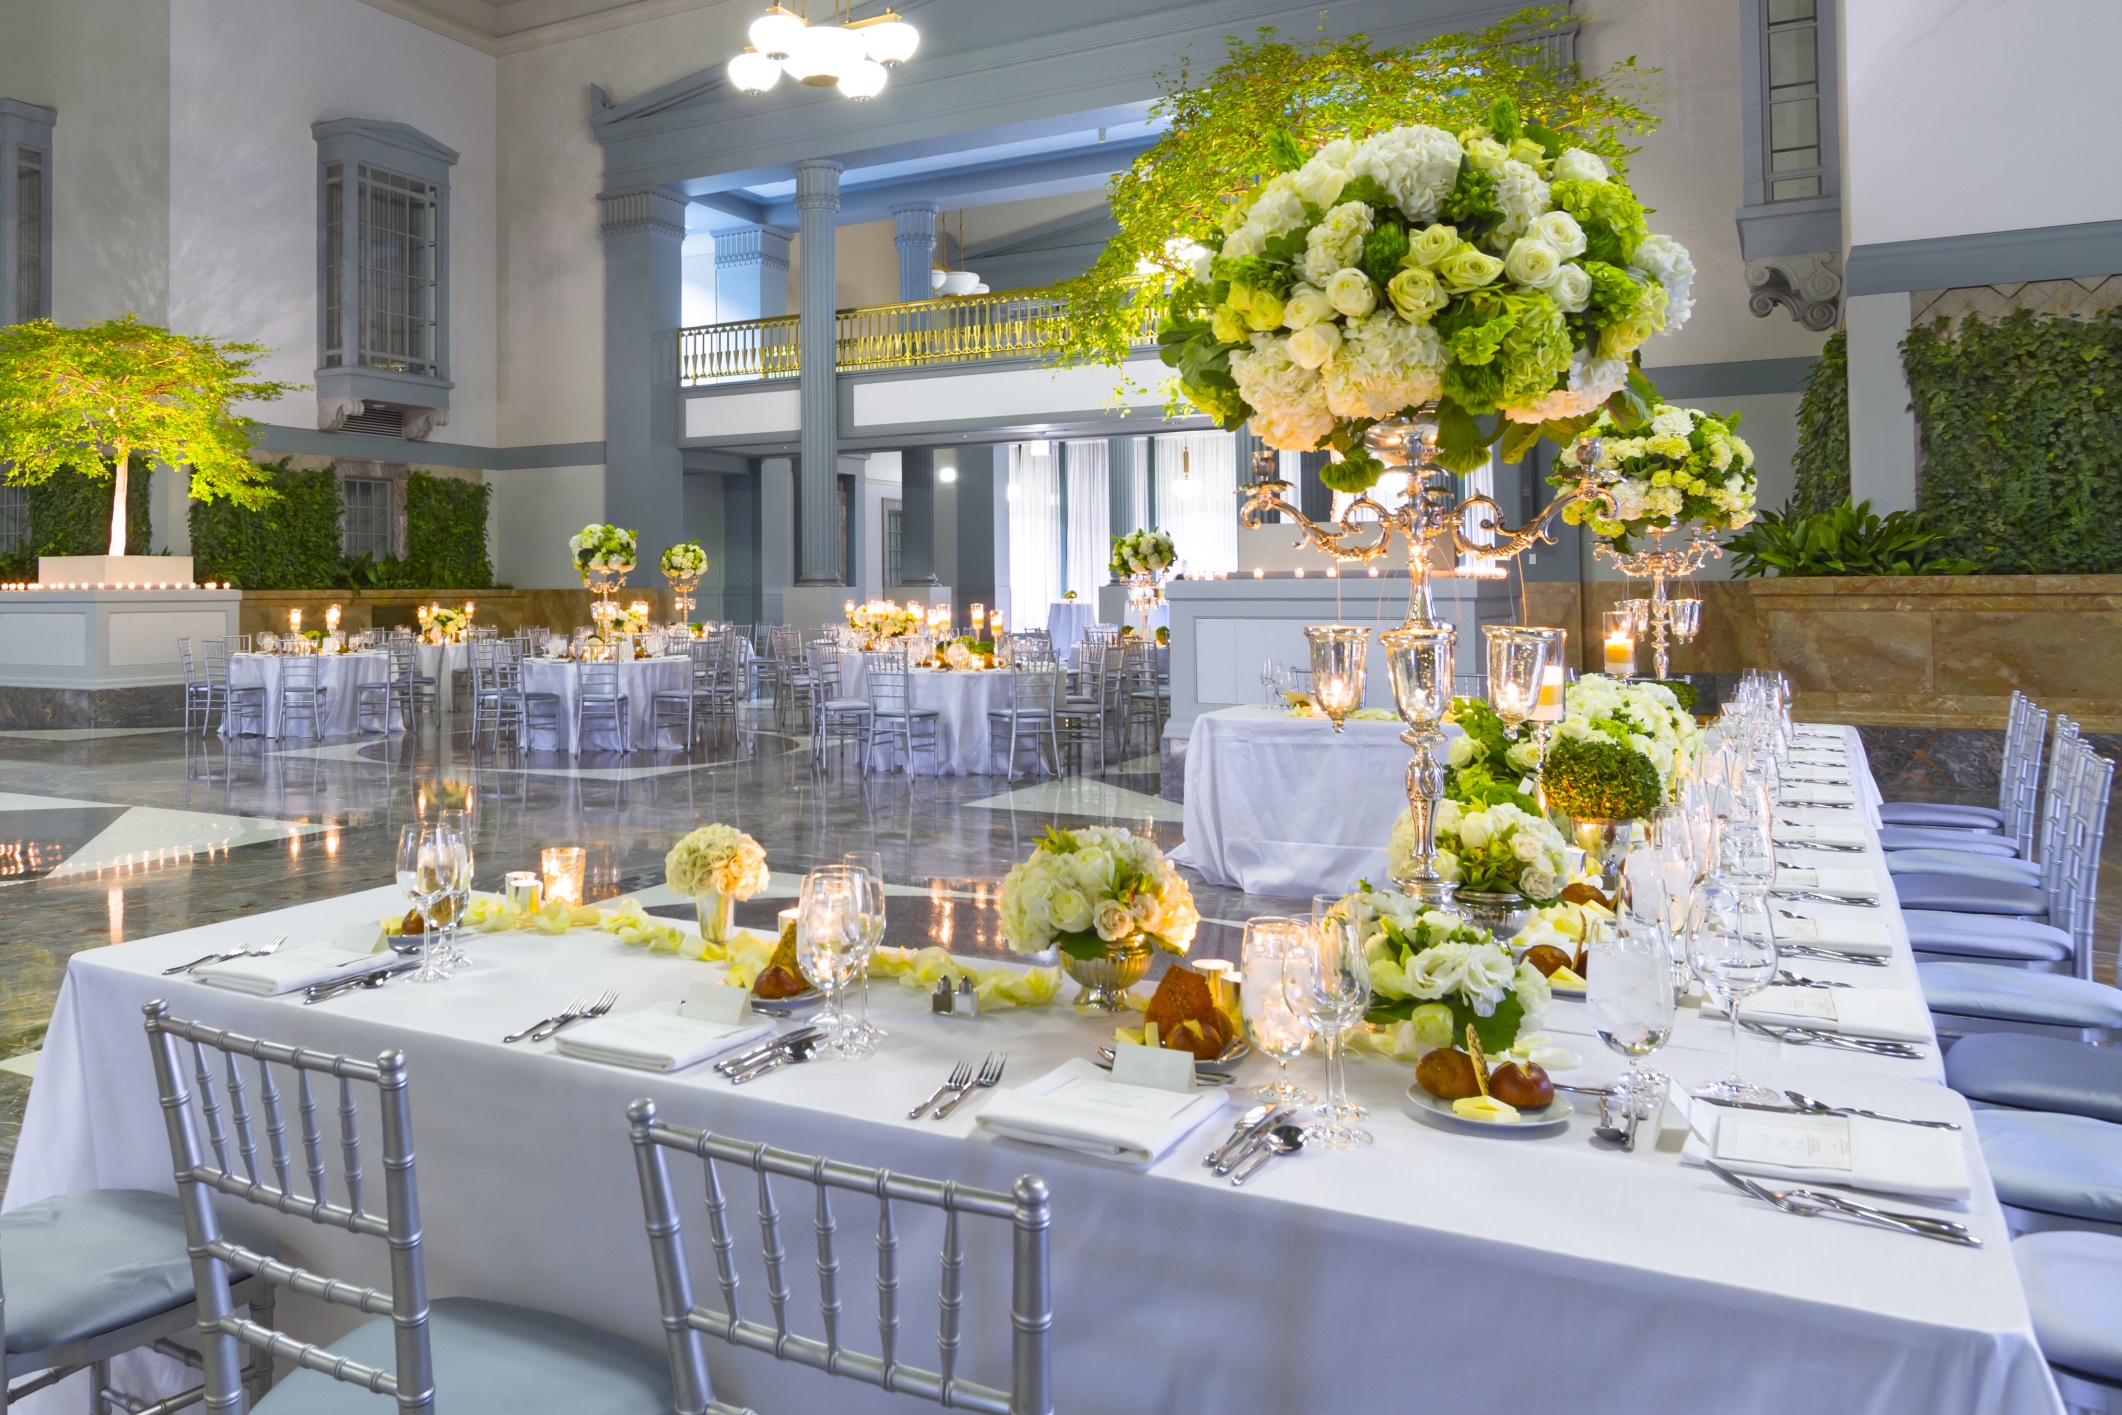 Tips for a Great Wedding Reception